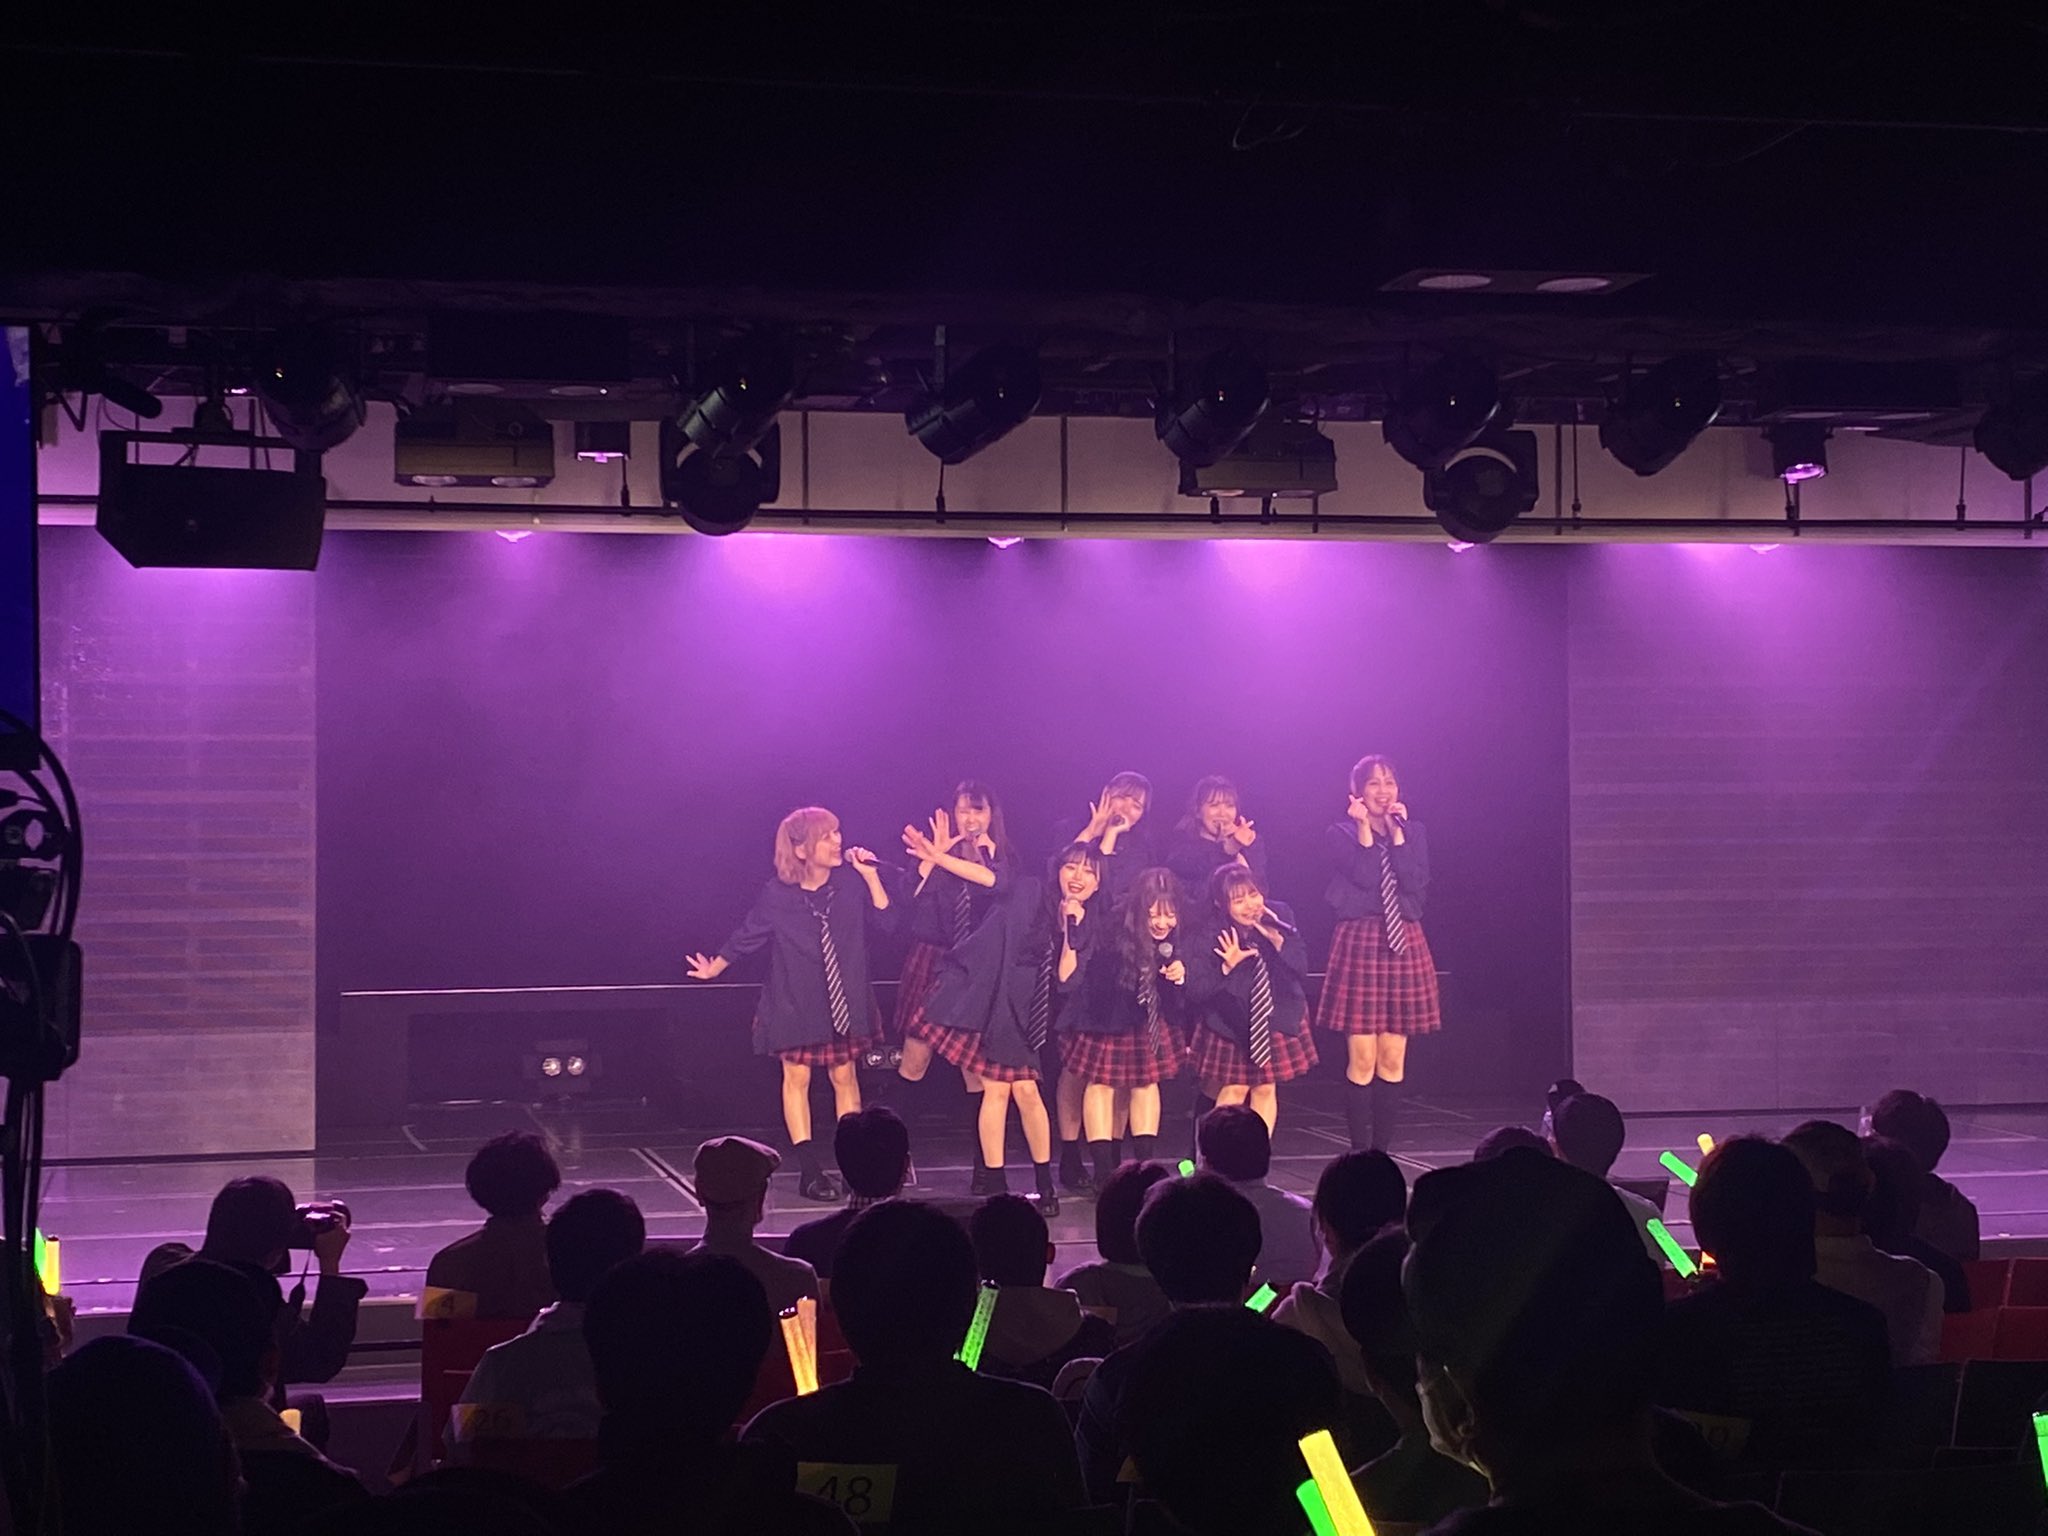 Ngt48 Official : Ngt48 | ngt48公式 : ngt48